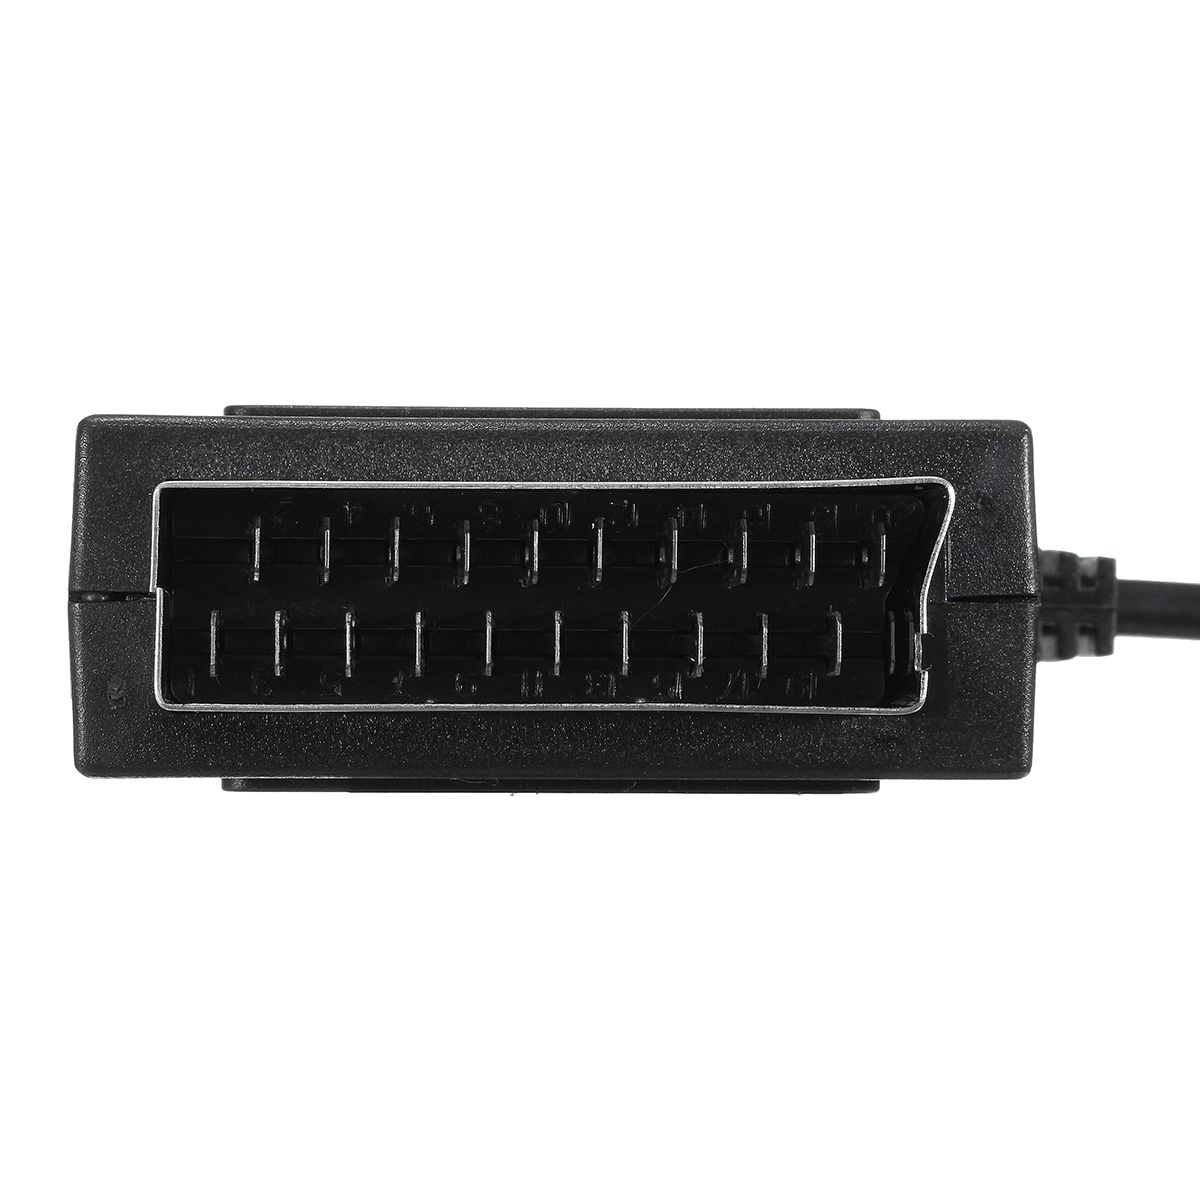 Stereo-SCART-Male-to-Output-35mm-Female-Adapter-Cable-1424679